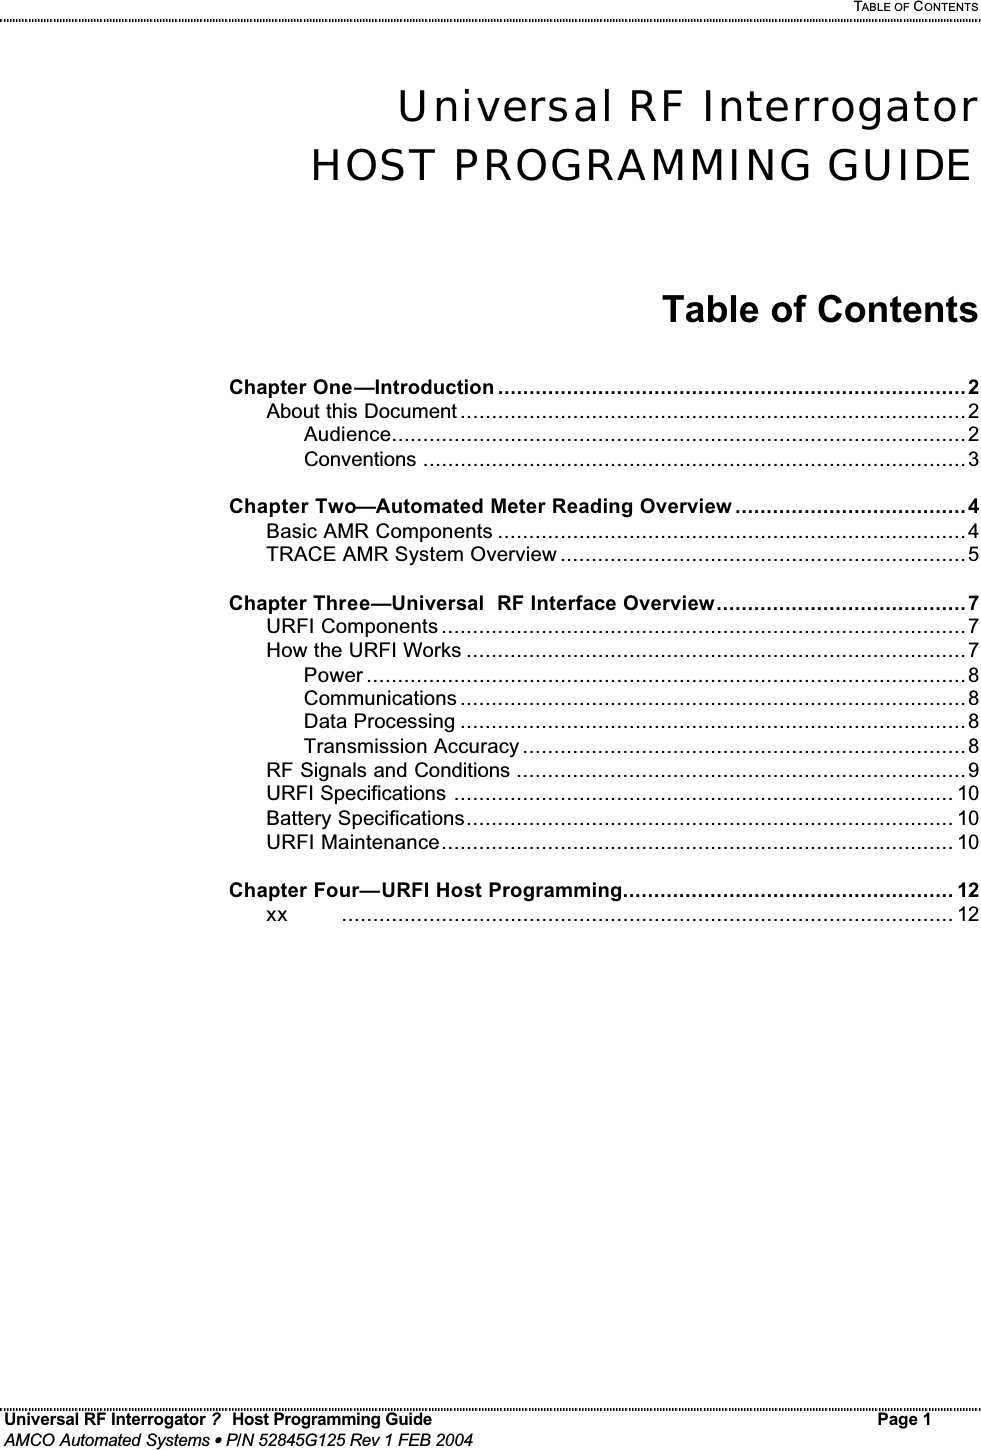   TABLE OF CONTENTS Universal RF Interrogator ?  Host Programming Guide Page 1  AMCO Automated Systems • P/N 52845G125 Rev 1 FEB 2004   Universal RF Interrogator HOST PROGRAMMING GUIDE   Table of Contents  Chapter One—Introduction ...........................................................................2   About this Document .................................................................................2     Audience............................................................................................2     Conventions .......................................................................................3  Chapter Two—Automated Meter Reading Overview .....................................4   Basic AMR Components ...........................................................................4   TRACE AMR System Overview .................................................................5  Chapter Three—Universal  RF Interface Overview........................................7   URFI Components ....................................................................................7   How the URFI Works ................................................................................7     Power ................................................................................................8     Communications .................................................................................8     Data Processing .................................................................................8     Transmission Accuracy .......................................................................8   RF Signals and Conditions ........................................................................9   URFI Specifications ................................................................................ 10   Battery Specifications.............................................................................. 10   URFI Maintenance.................................................................................. 10  Chapter Four—URFI Host Programming..................................................... 12   xx    .................................................................................................. 12          